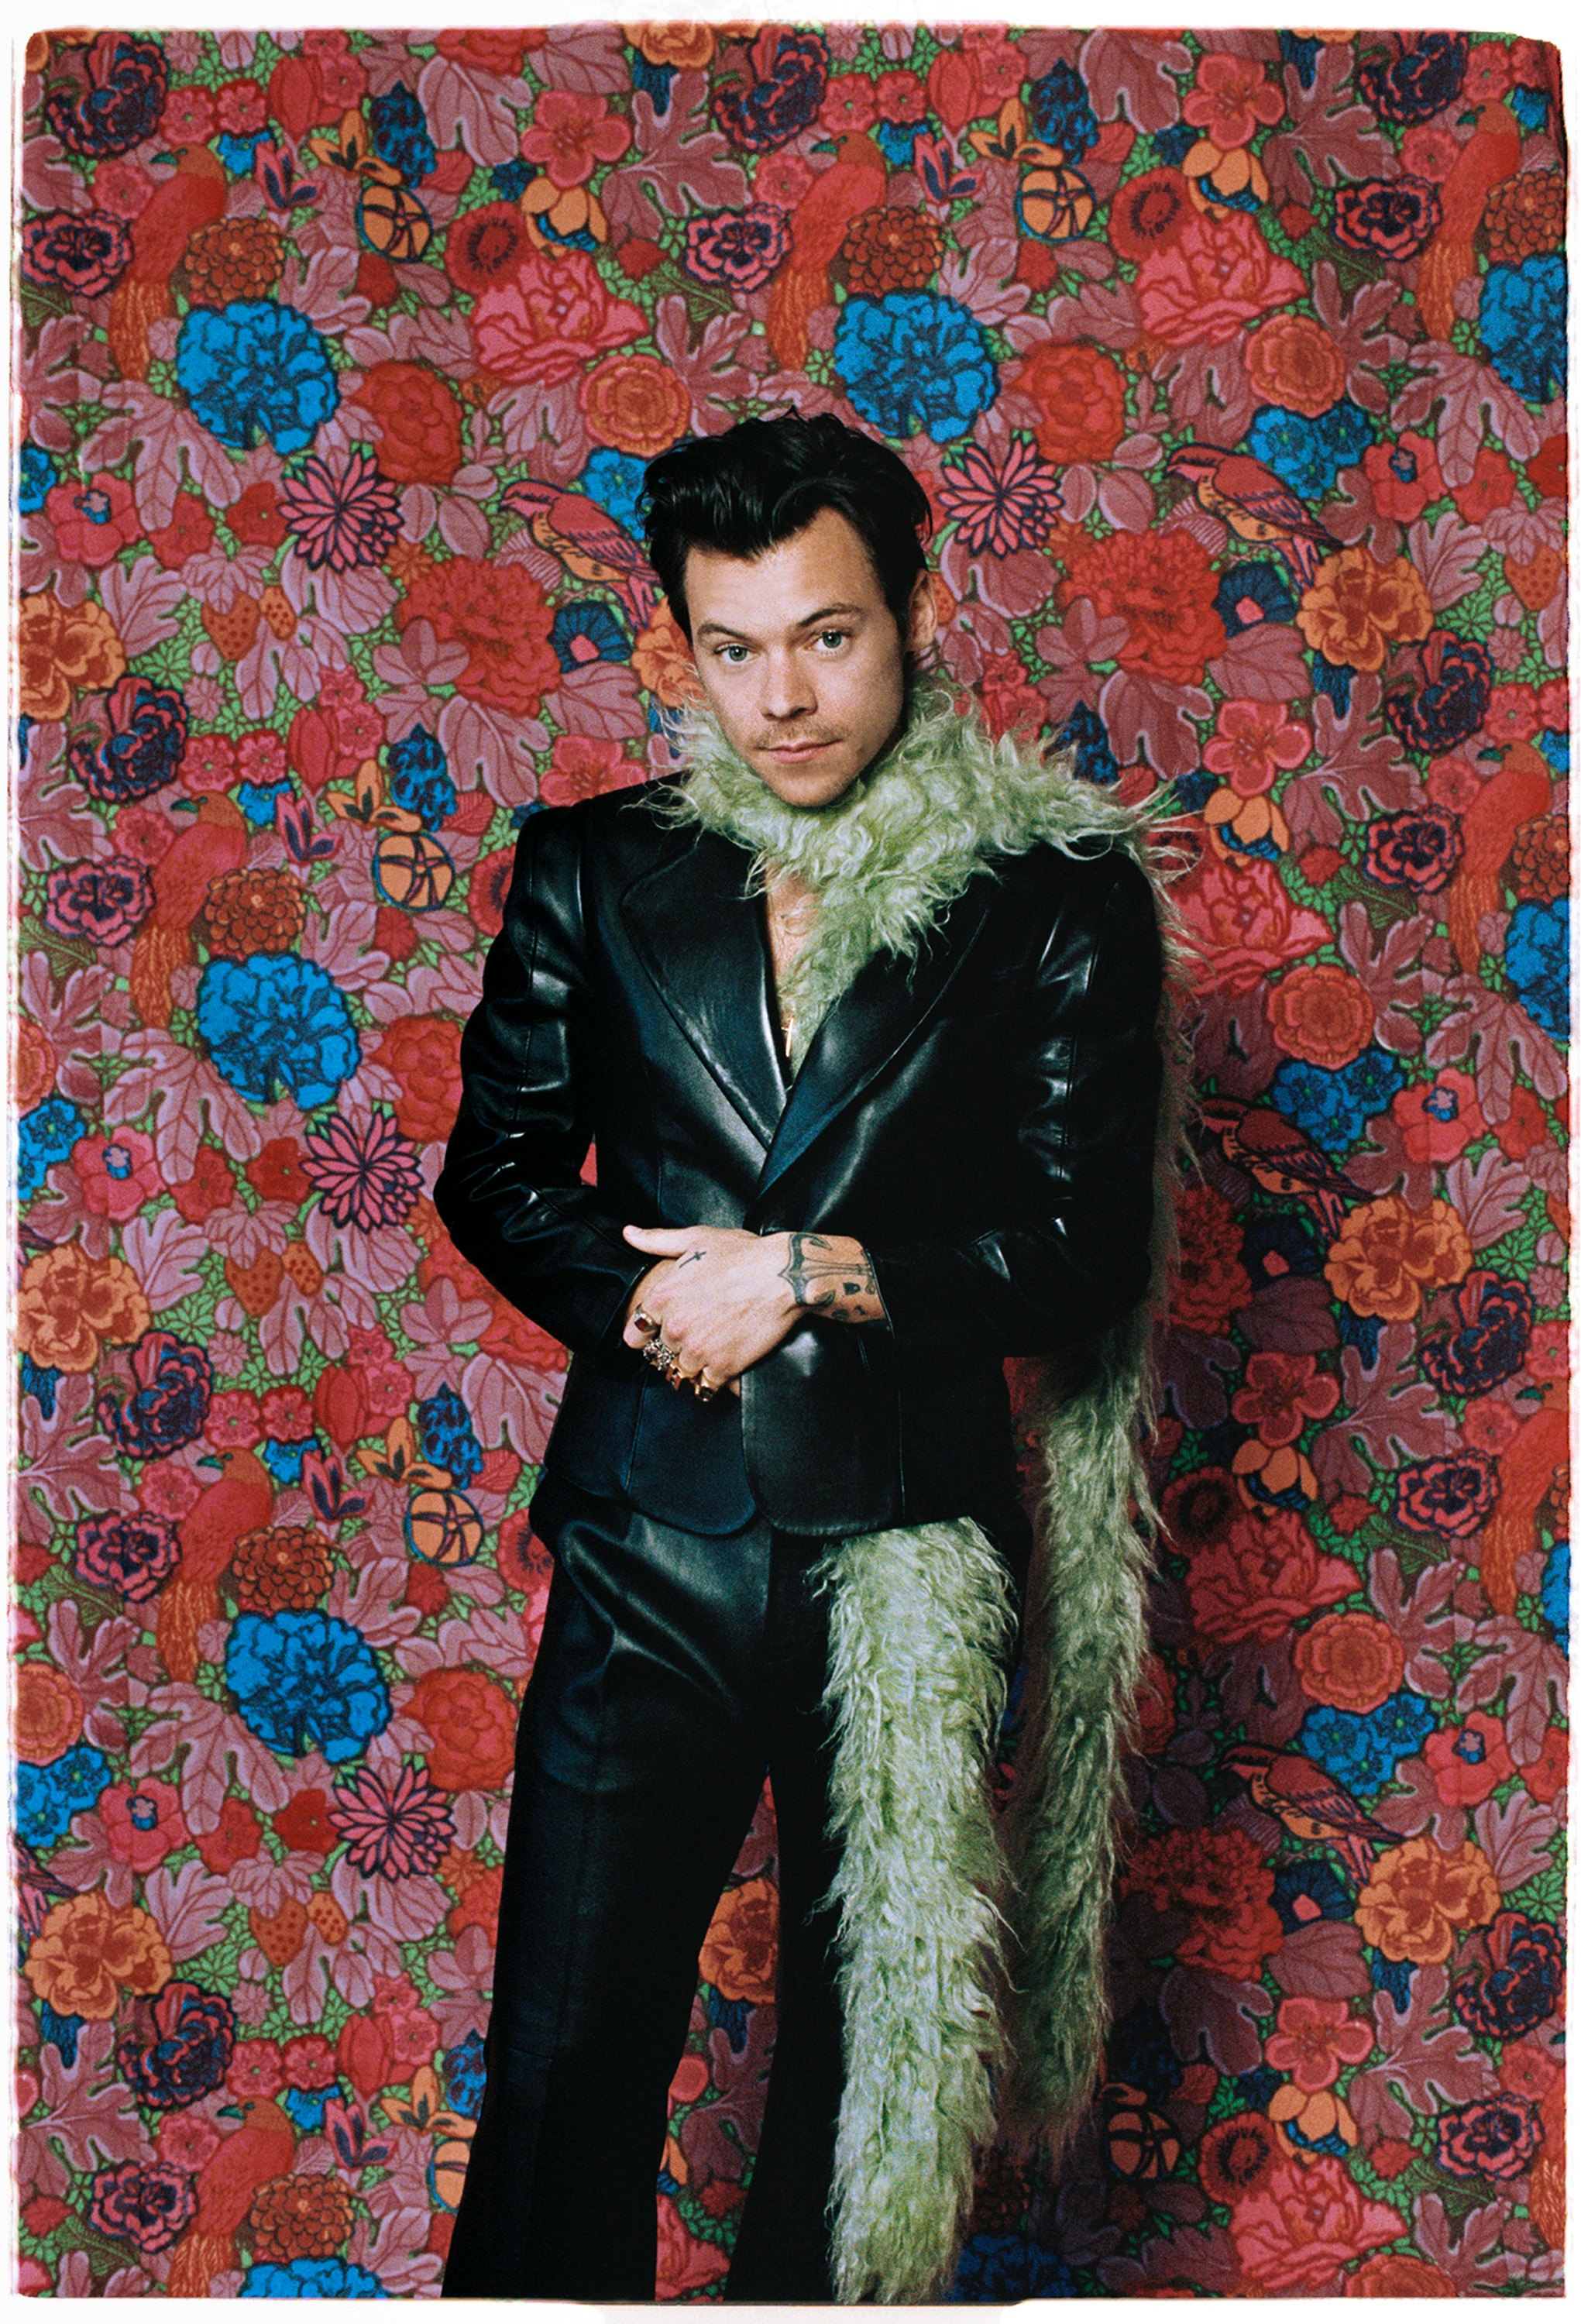 Harry Styles Fashion Archive  Harry at the One Night Only London show   May 24